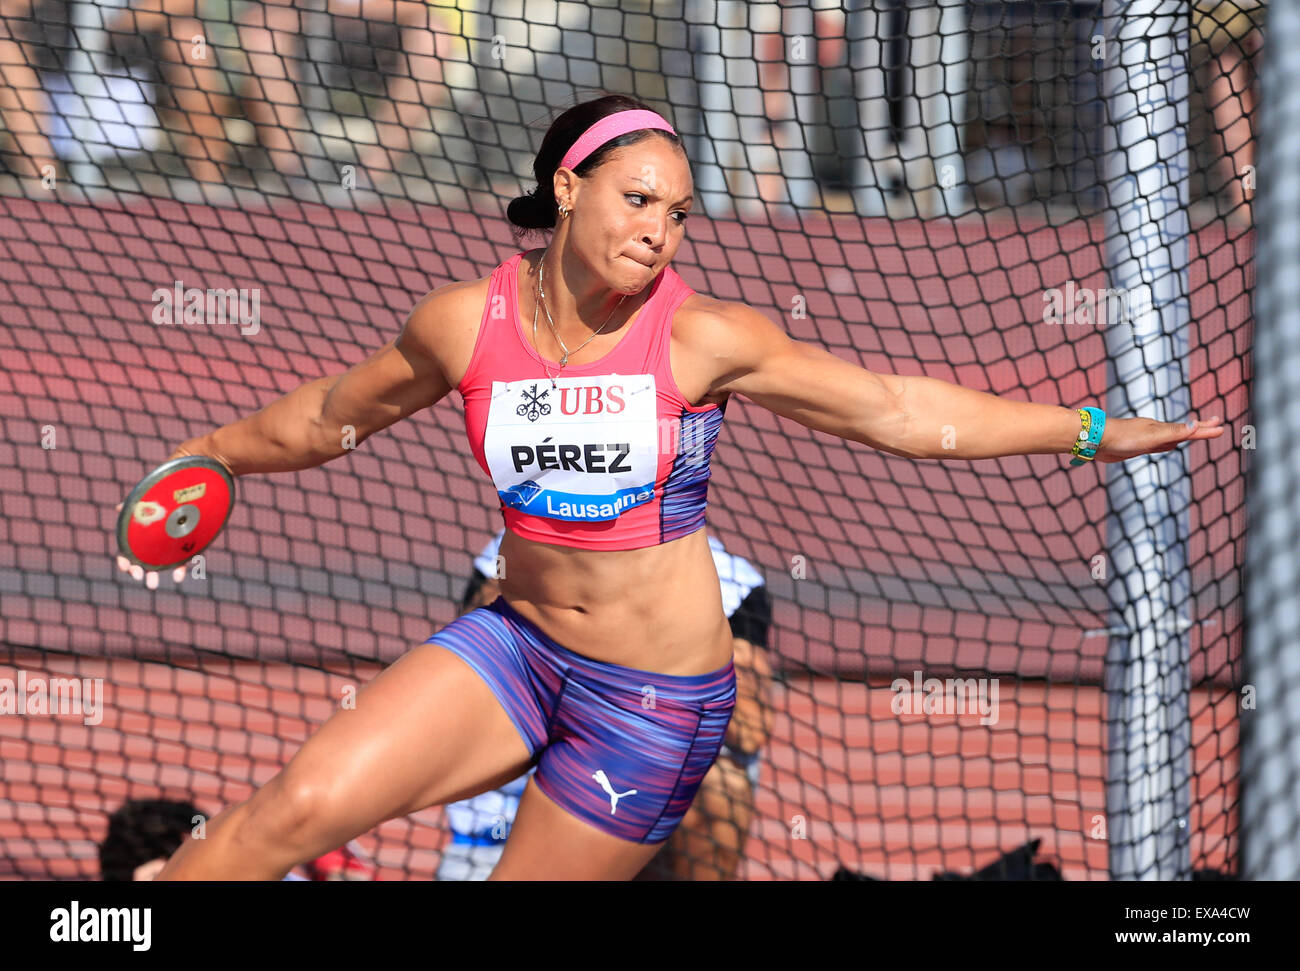 Lausanne, Switzerland. 9th July, 2015. Perez Yaimi of Cuba competes during the women's discus match at the 2015 IAAF Diamond League Athletics in Lausanne, Switzerland, on July 9, 2015. Perez Yaimi claimed the title with 67.13 meters. Credit:  Xu Jinquan/Xinhua/Alamy Live News Stock Photo